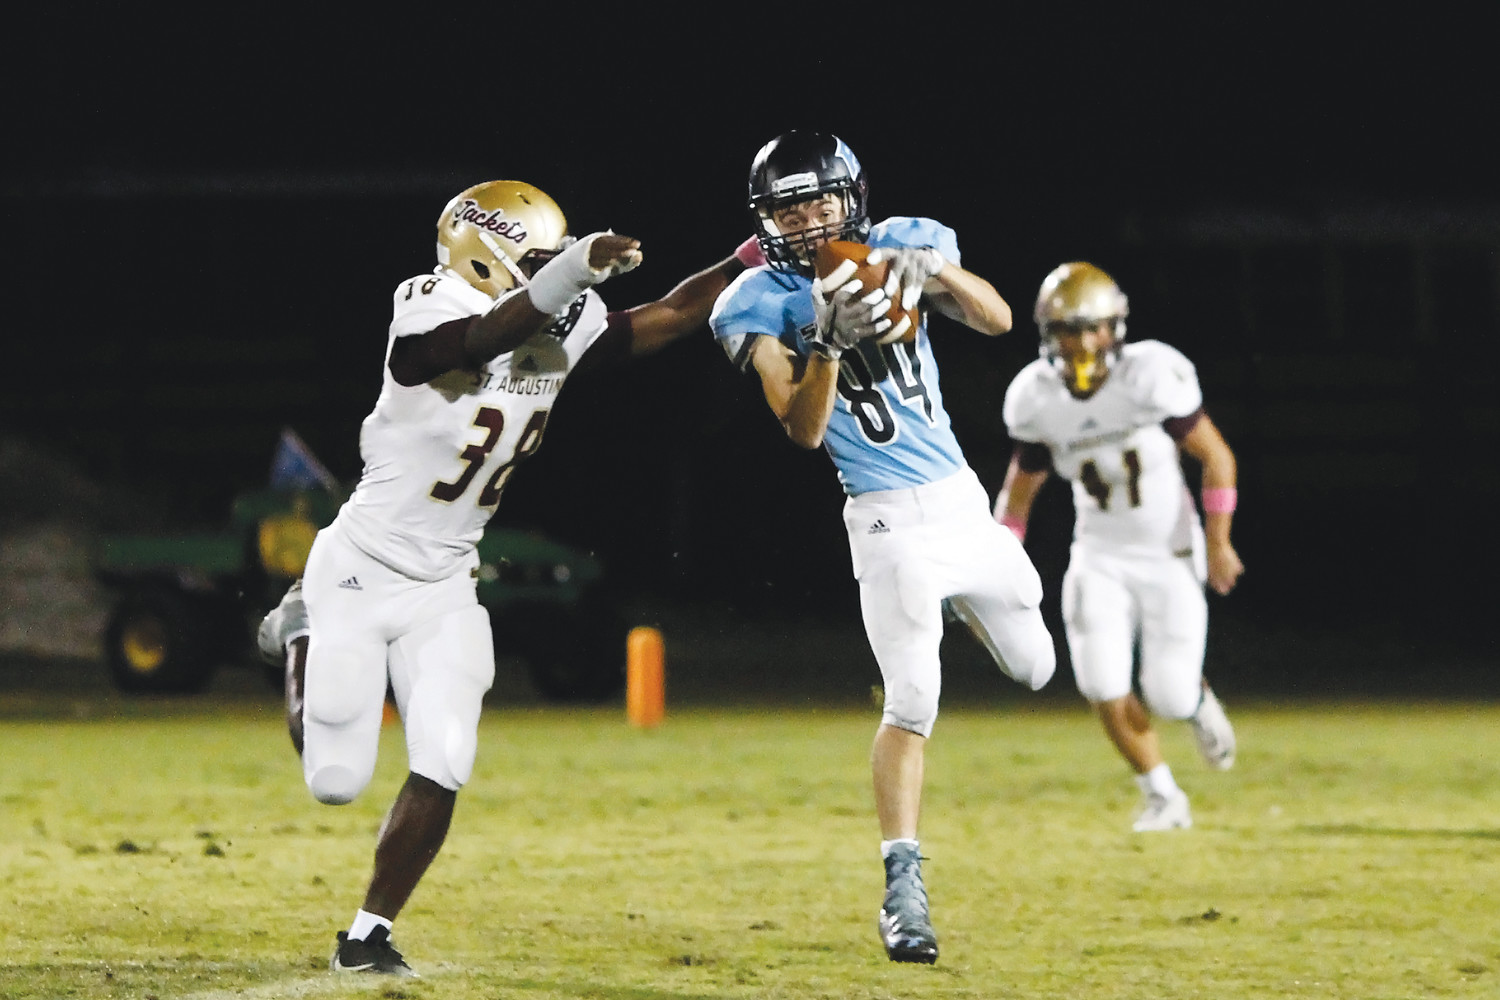 Cade D’Errico makes the catch for a Ponte Vedra first down.